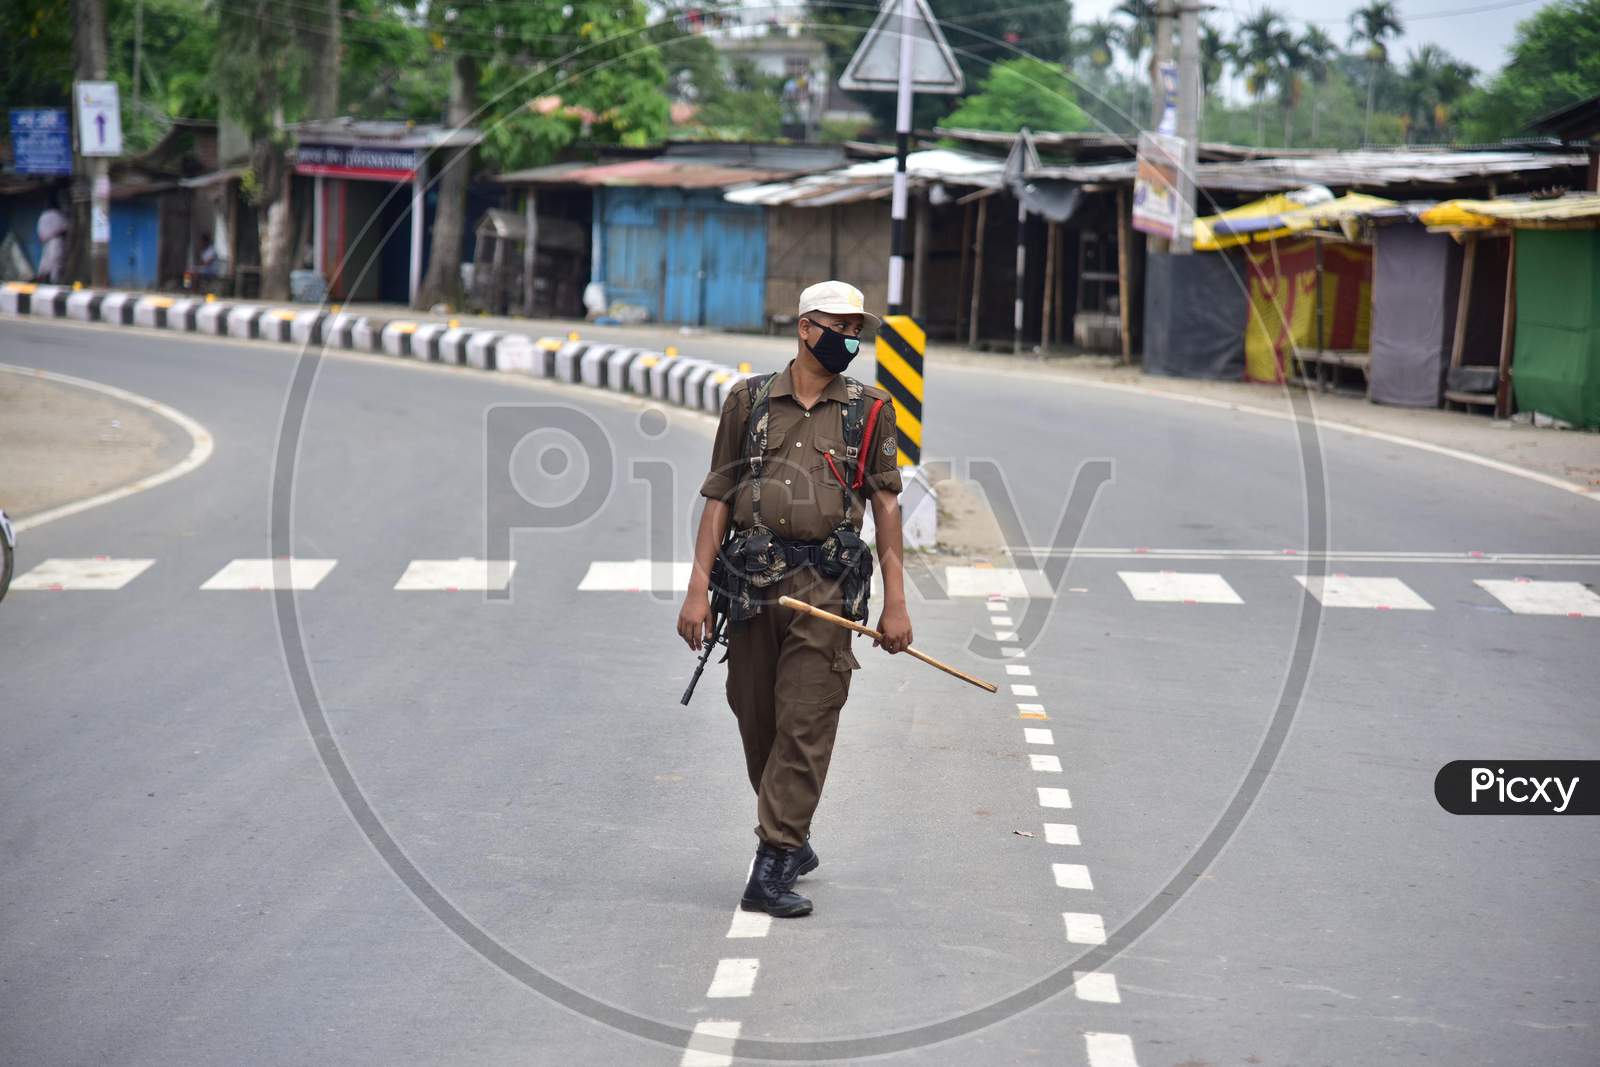 Security personnel patrolling the roads during the lockdown imposed by the Assam government to control the spread of coronavirus in Nagaon, Assam on July 04, 2020